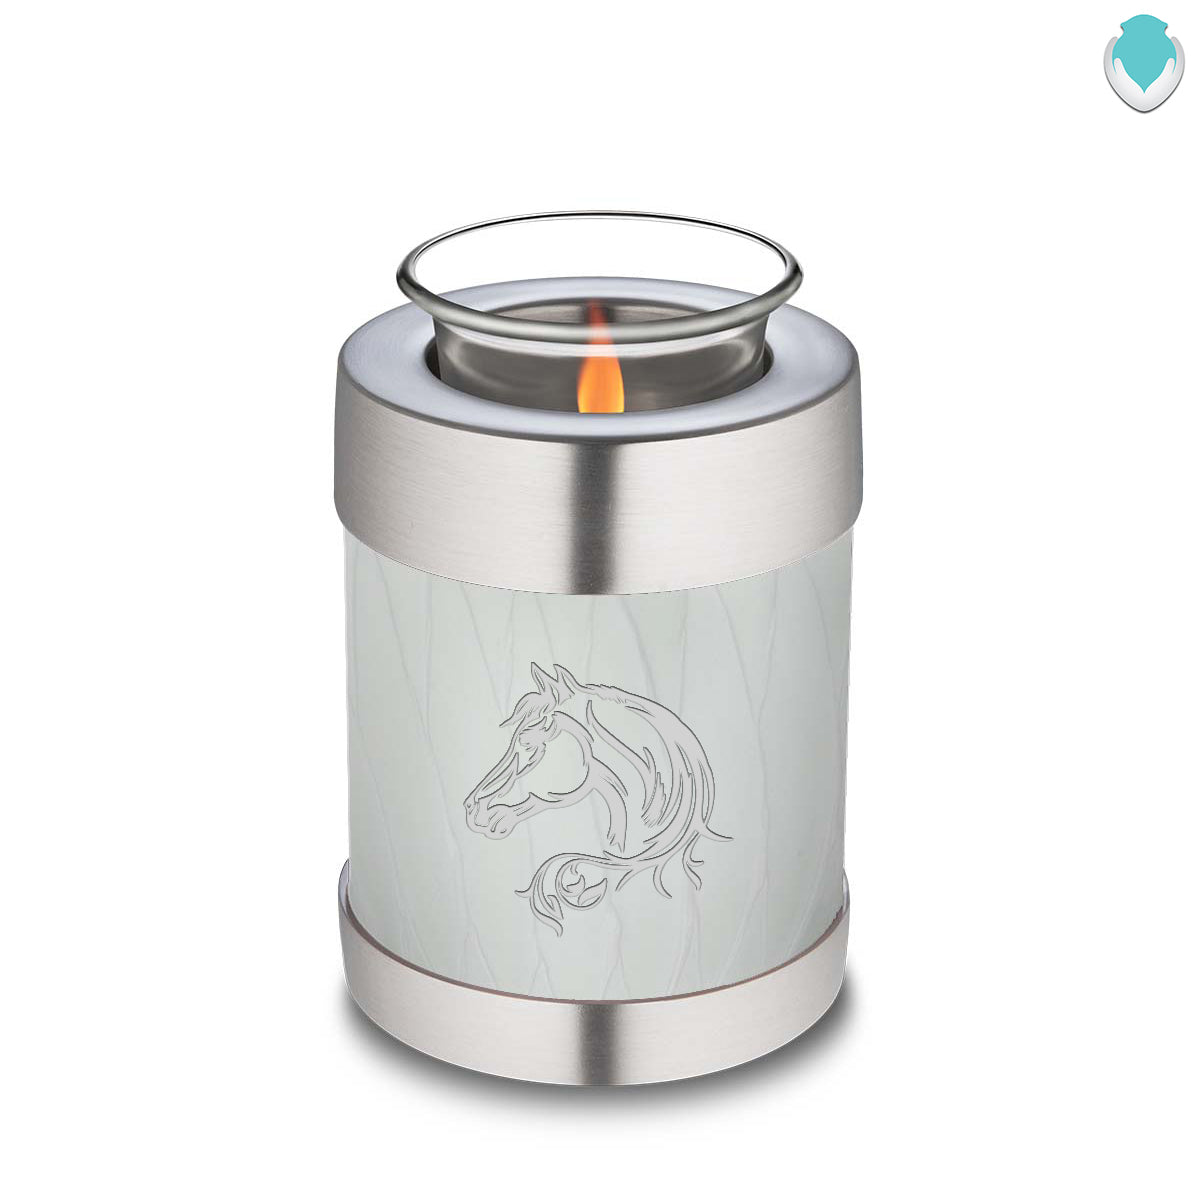 Candle Holder Embrace Pearl White Horse Cremation Urn